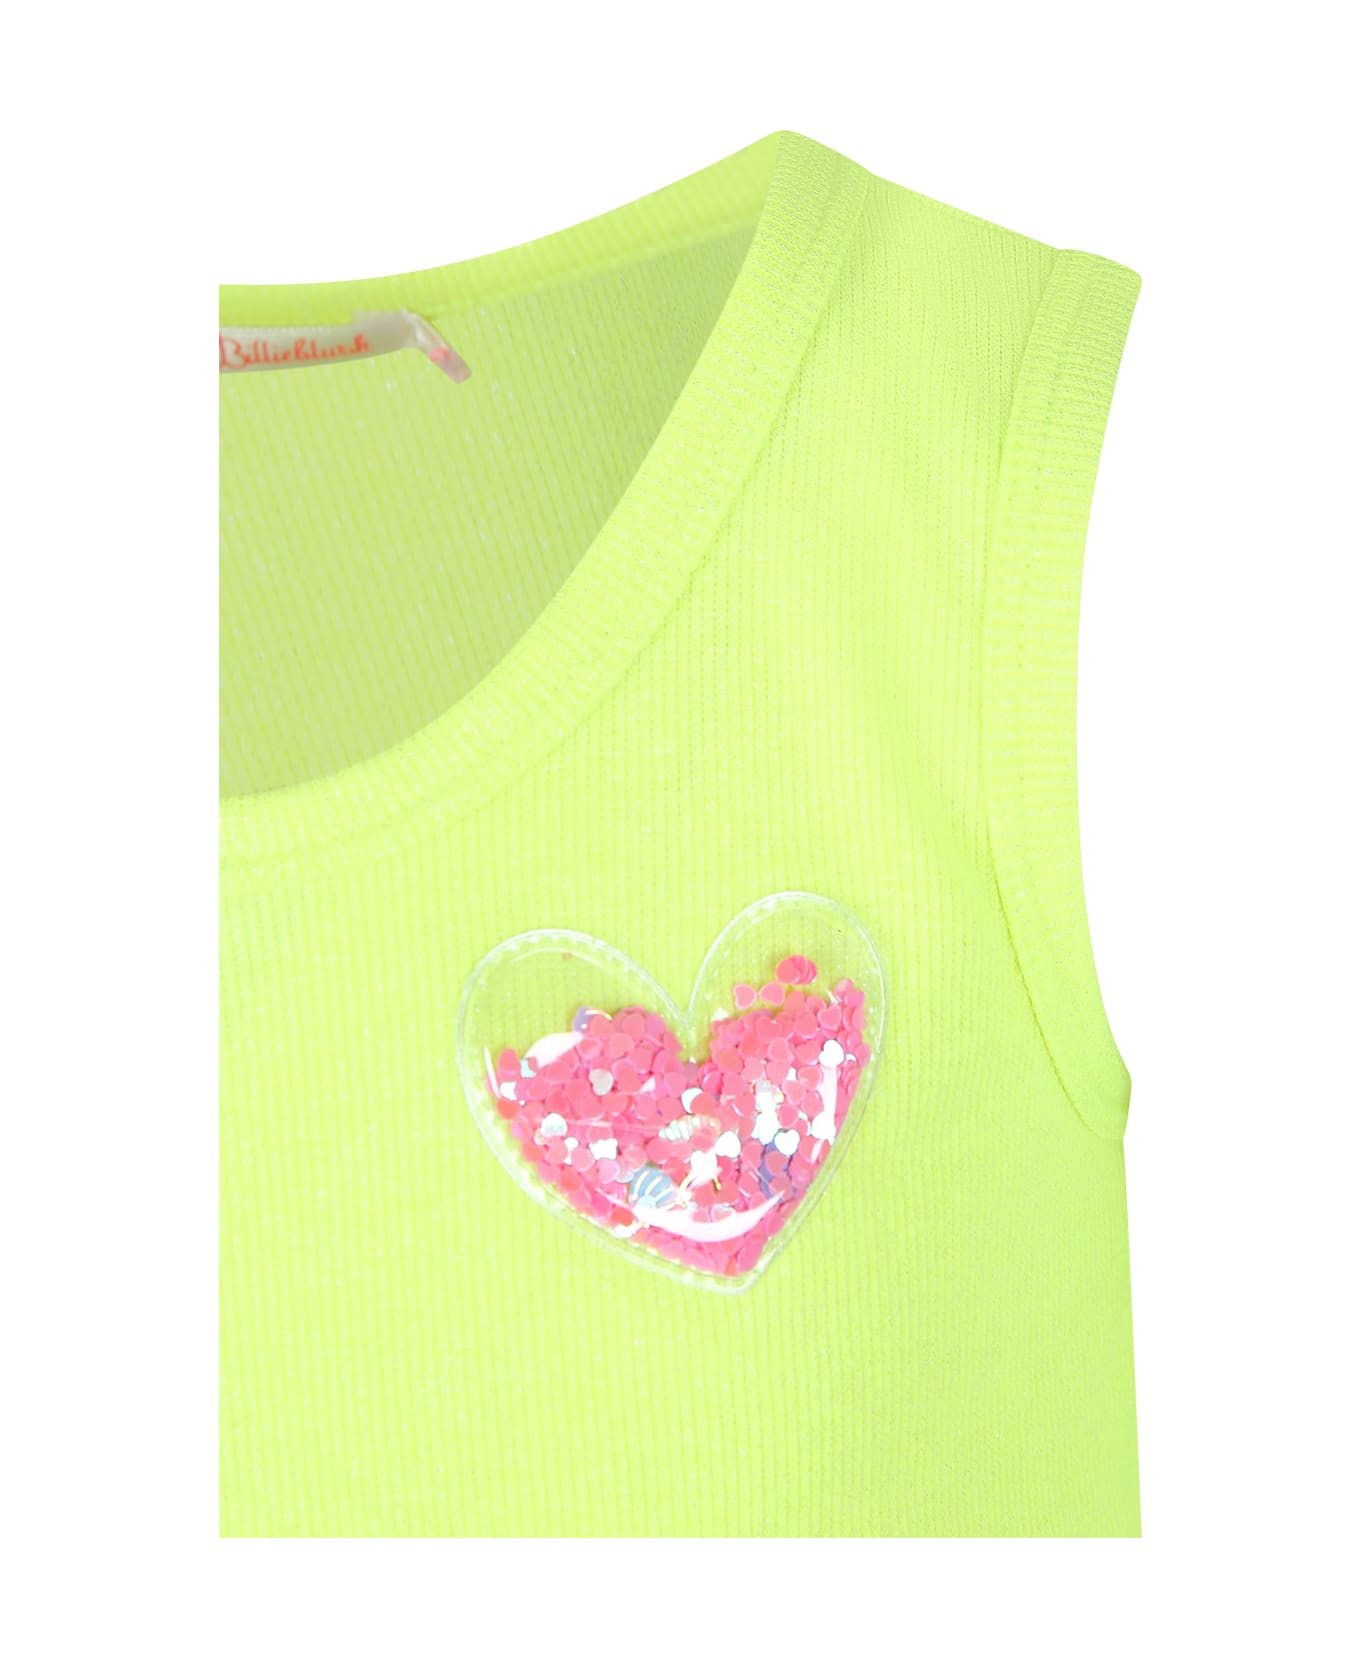 Billieblush Yellow Tank Top For Girl With Heart-shaped Bagde - Yellow Tシャツ＆ポロシャツ